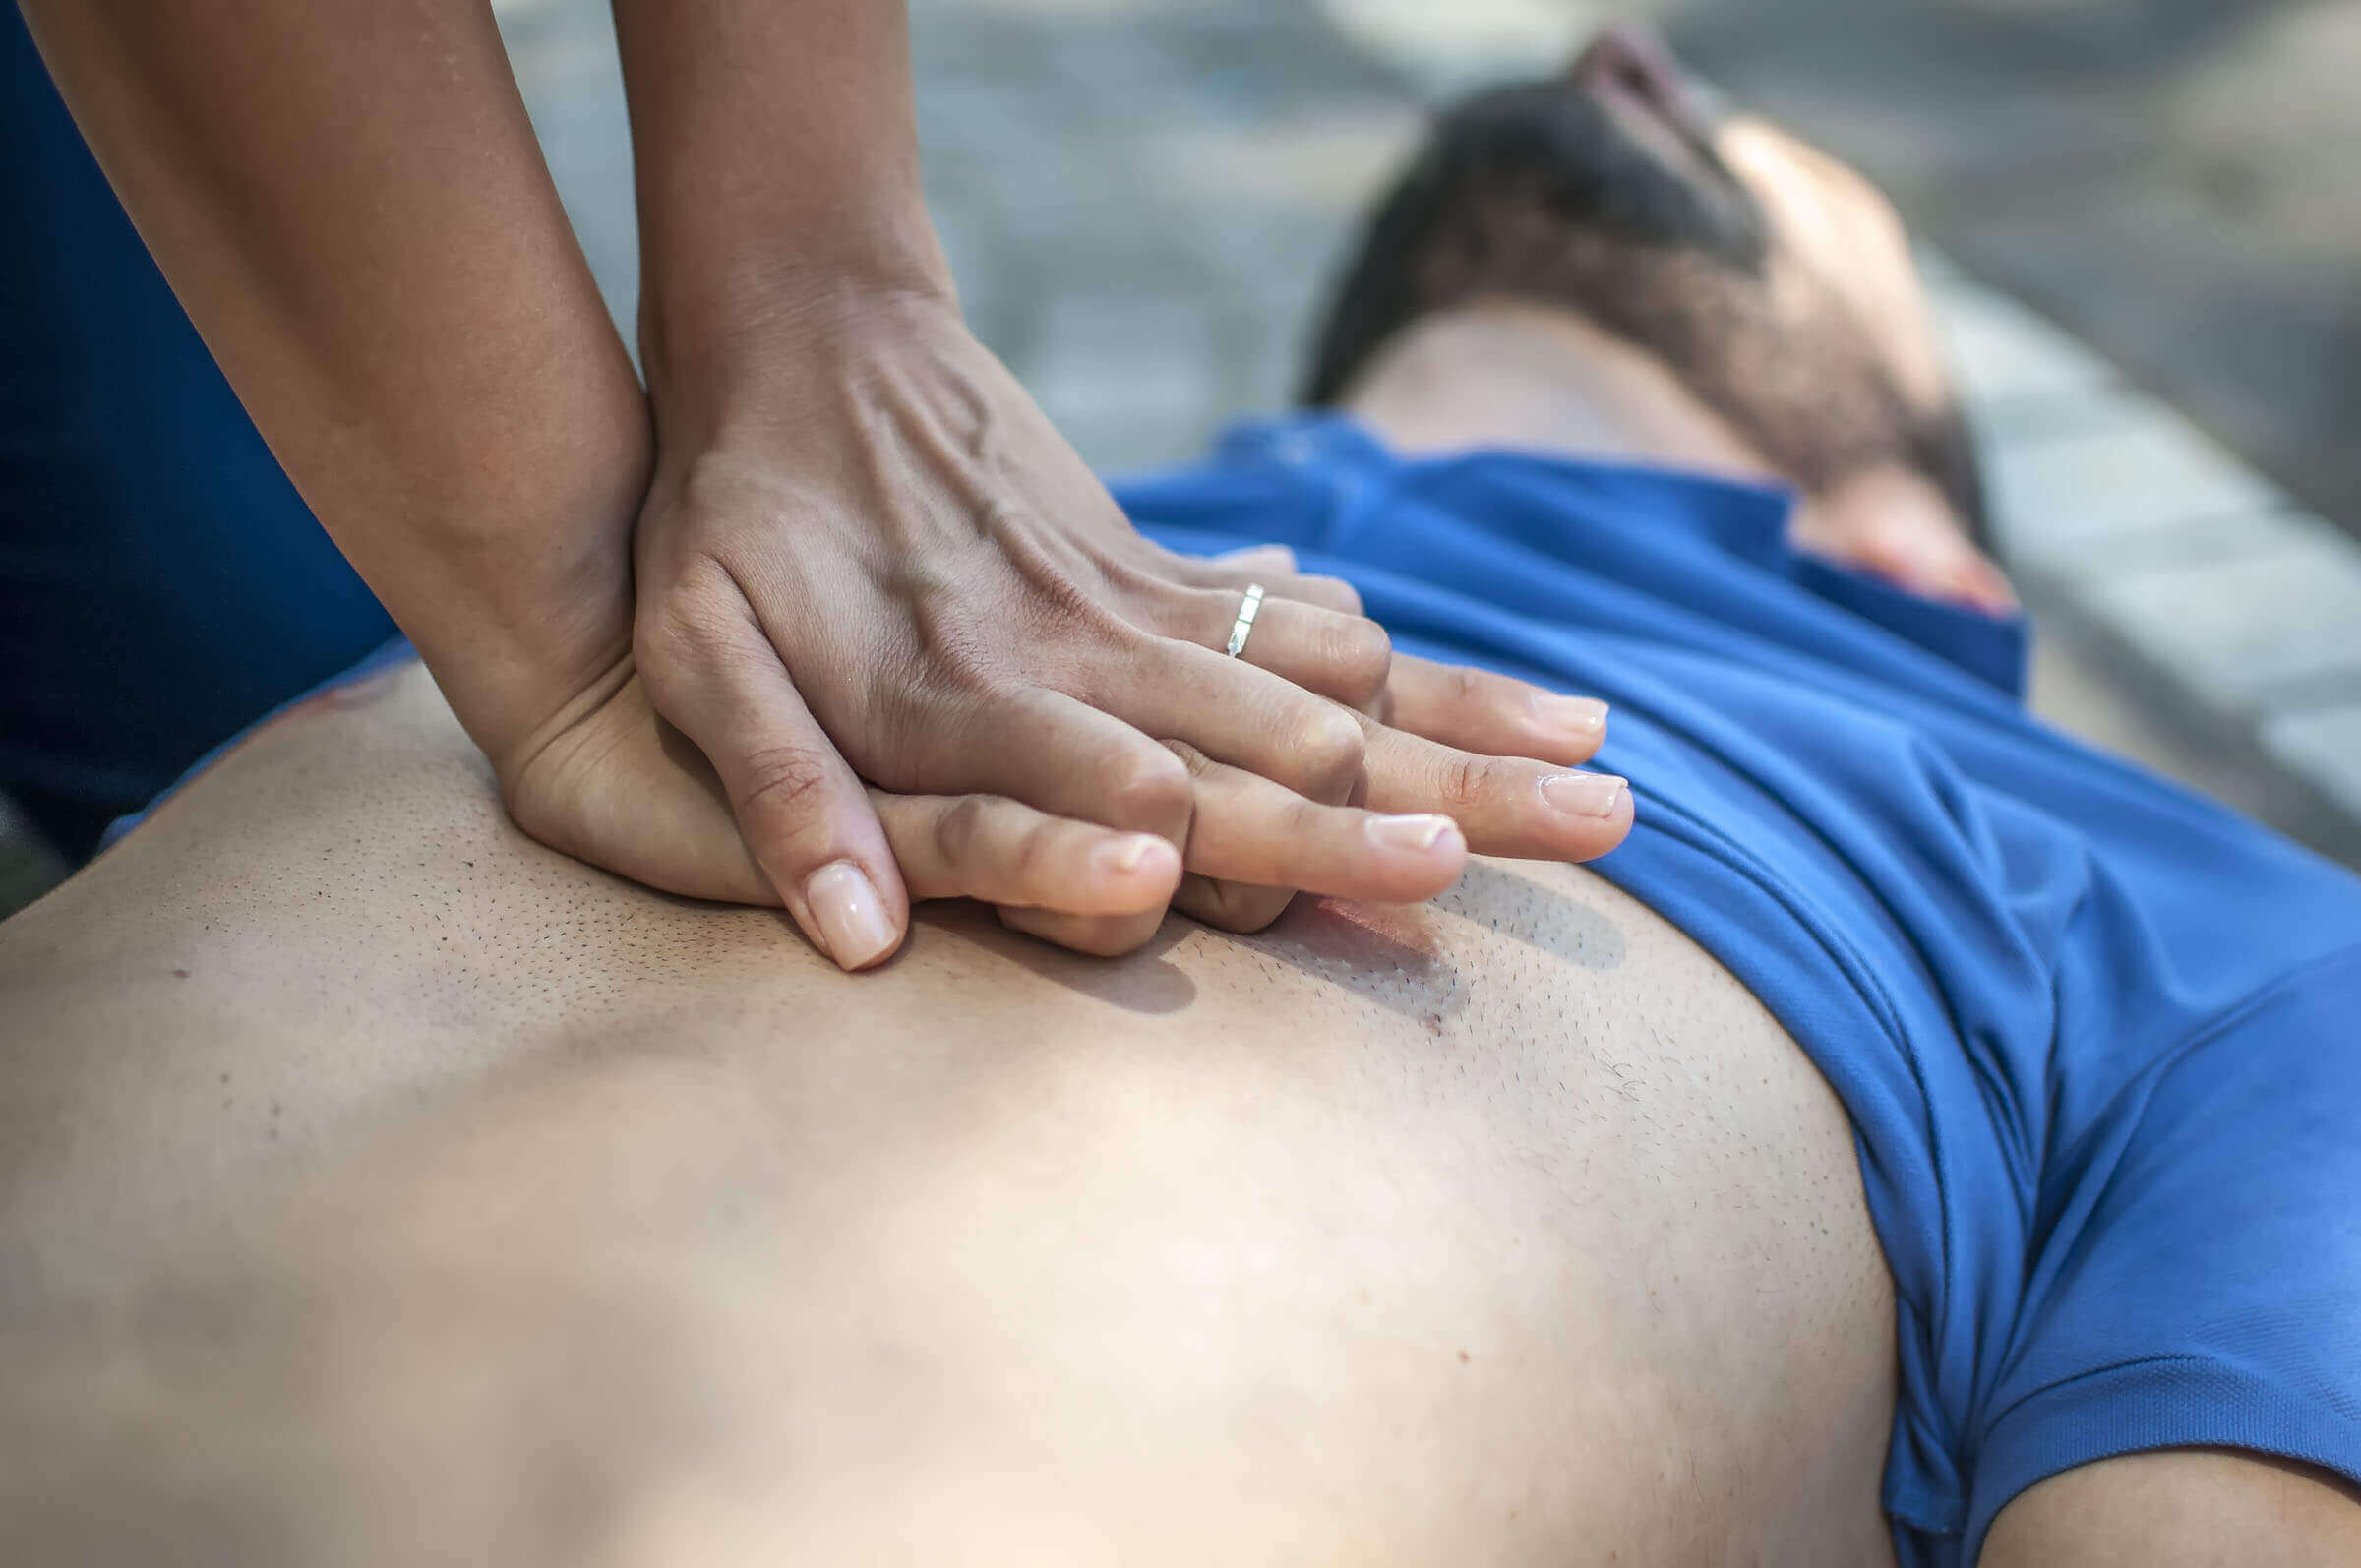 Does BLS Include First Aid and CPR?